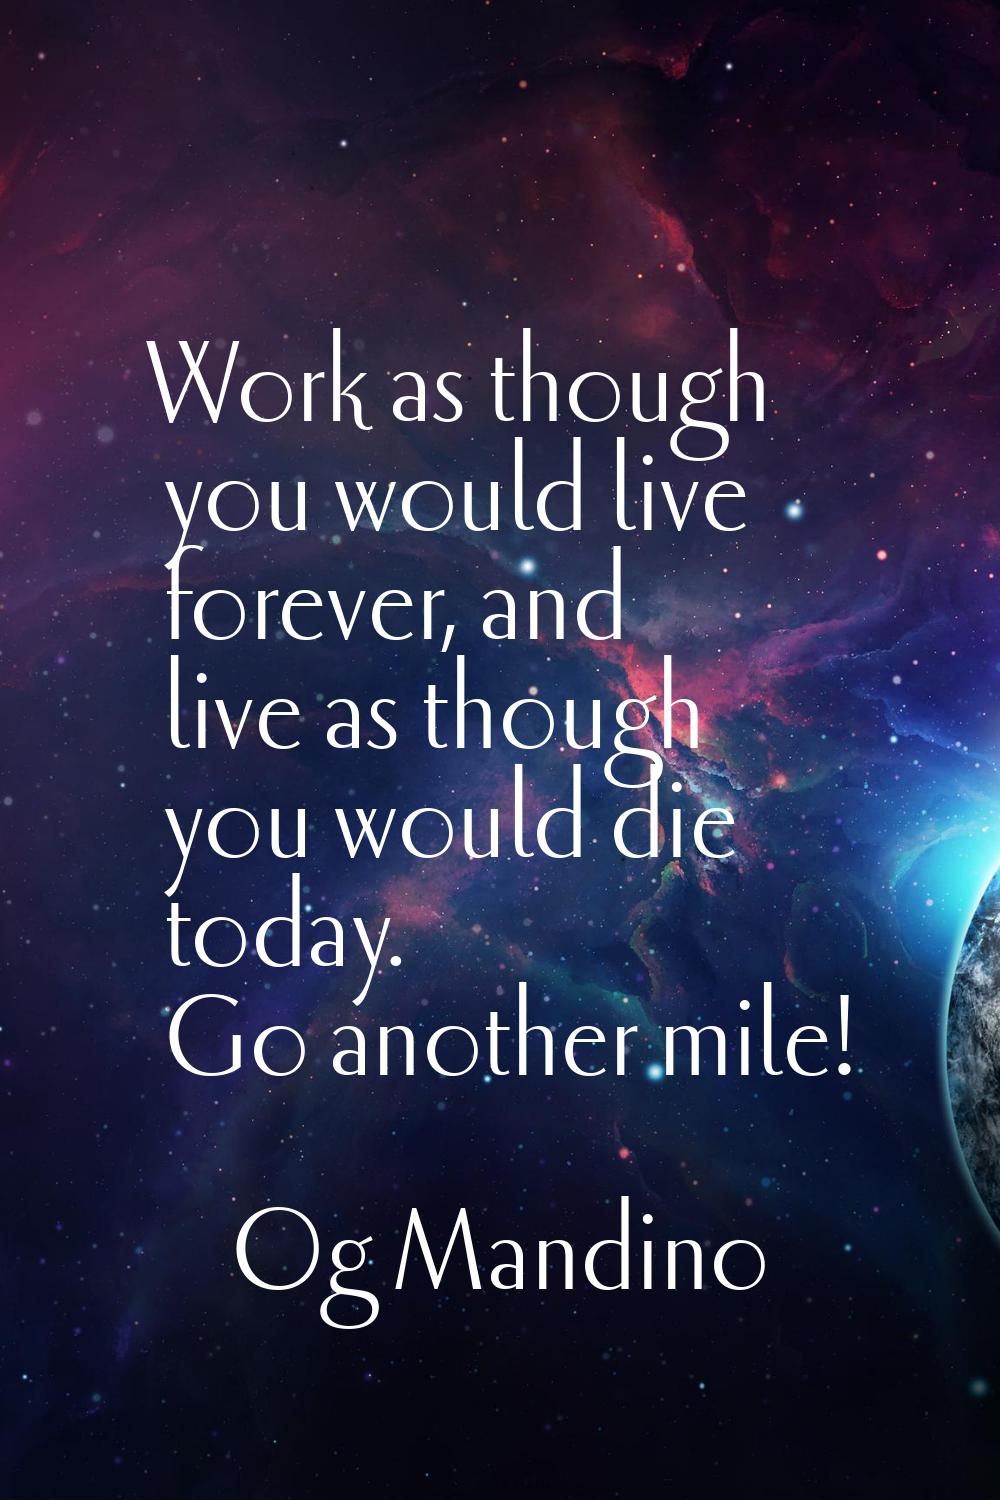 Work as though you would live forever, and live as though you would die today. Go another mile!